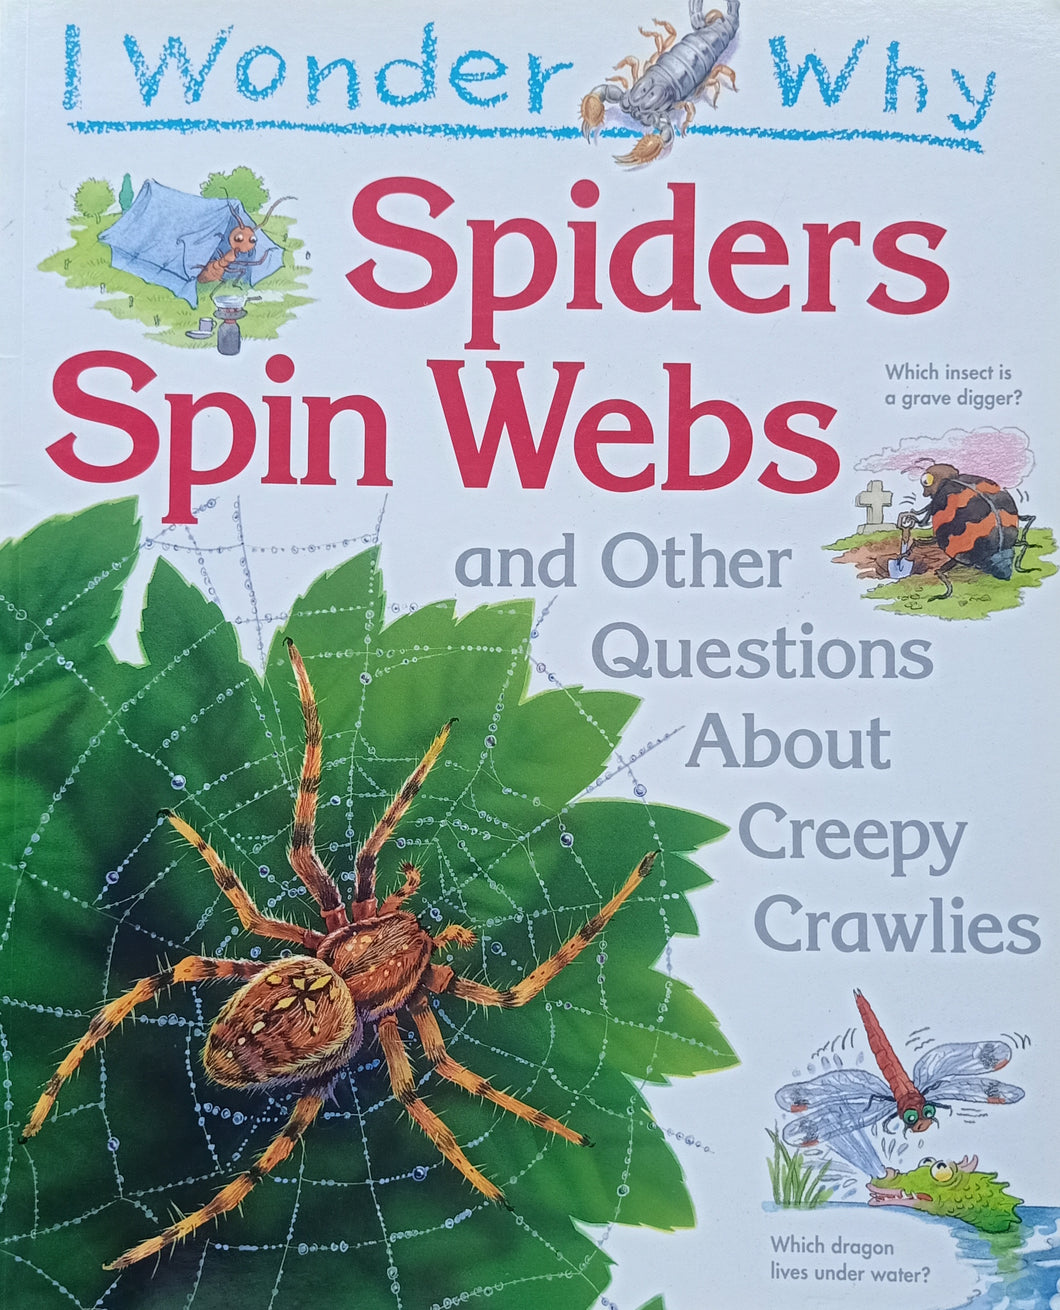 I Wonder Why Soiders Soin Webs And Other Questions About Creepy Crawlies